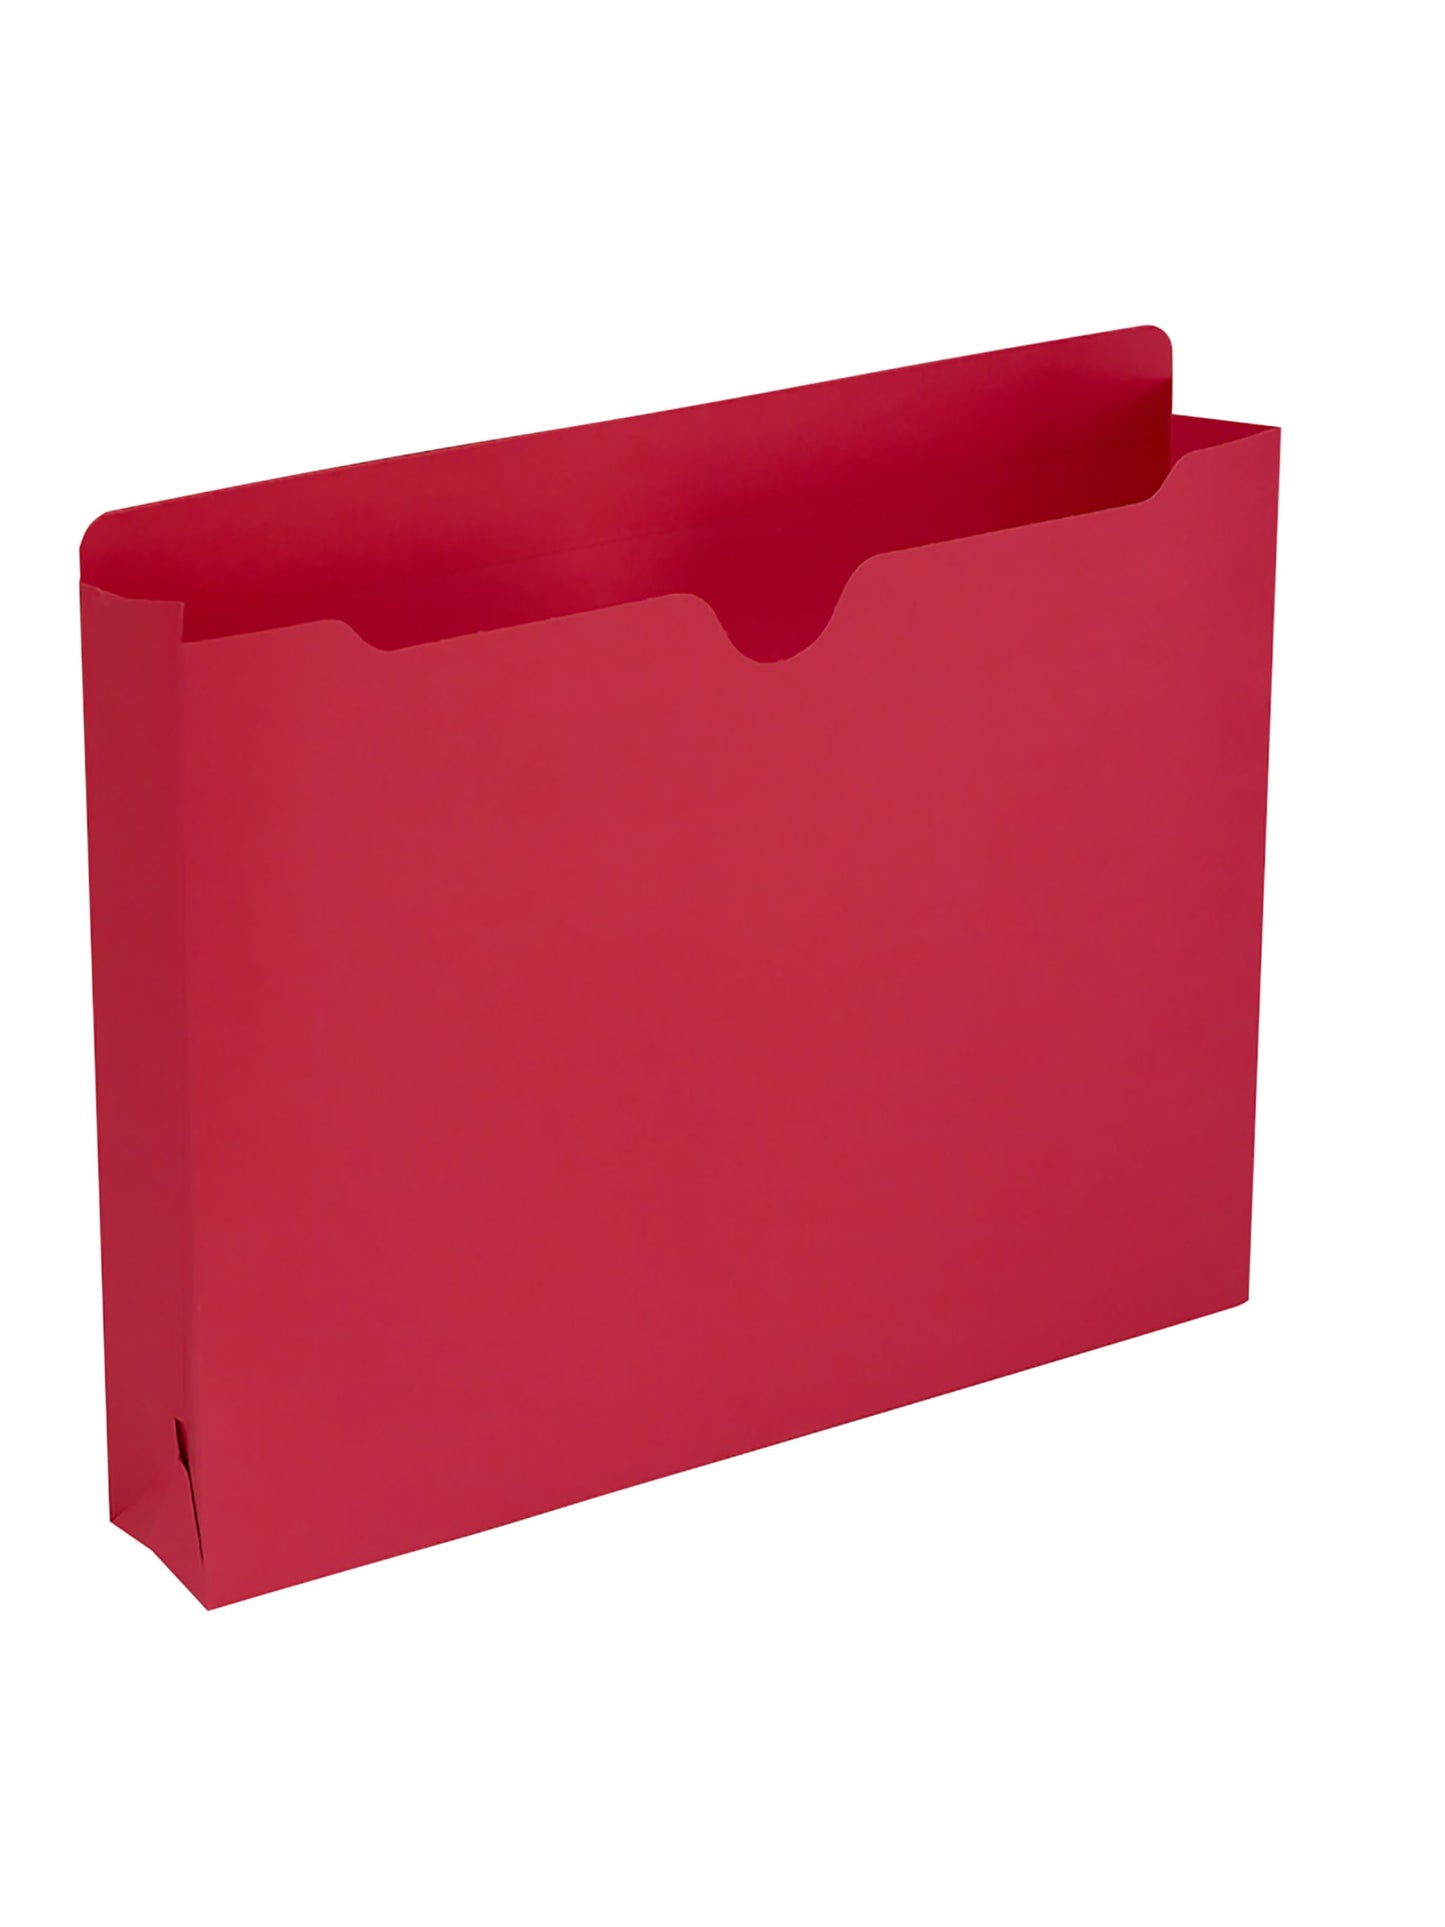 Colored File Jackets, Reinforced Straight-Cut Tab, 2 inch Expansion, Red Color, Letter Size, Set of 0, 30086486755697